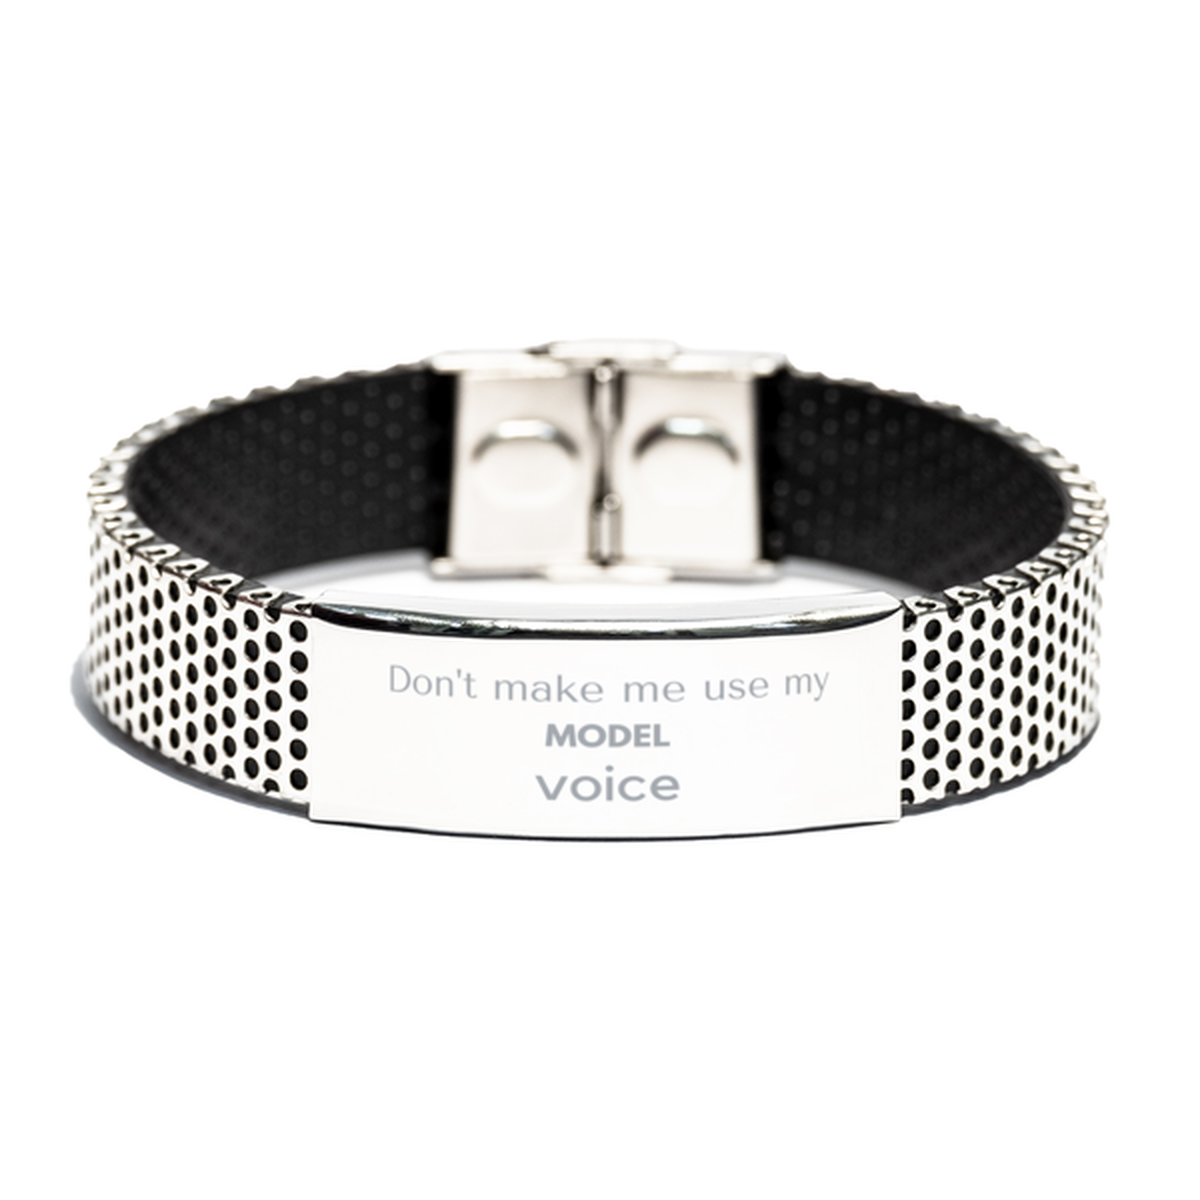 Don't make me use my Model voice, Sarcasm Model Gifts, Christmas Model Stainless Steel Bracelet Birthday Unique Gifts For Model Coworkers, Men, Women, Colleague, Friends